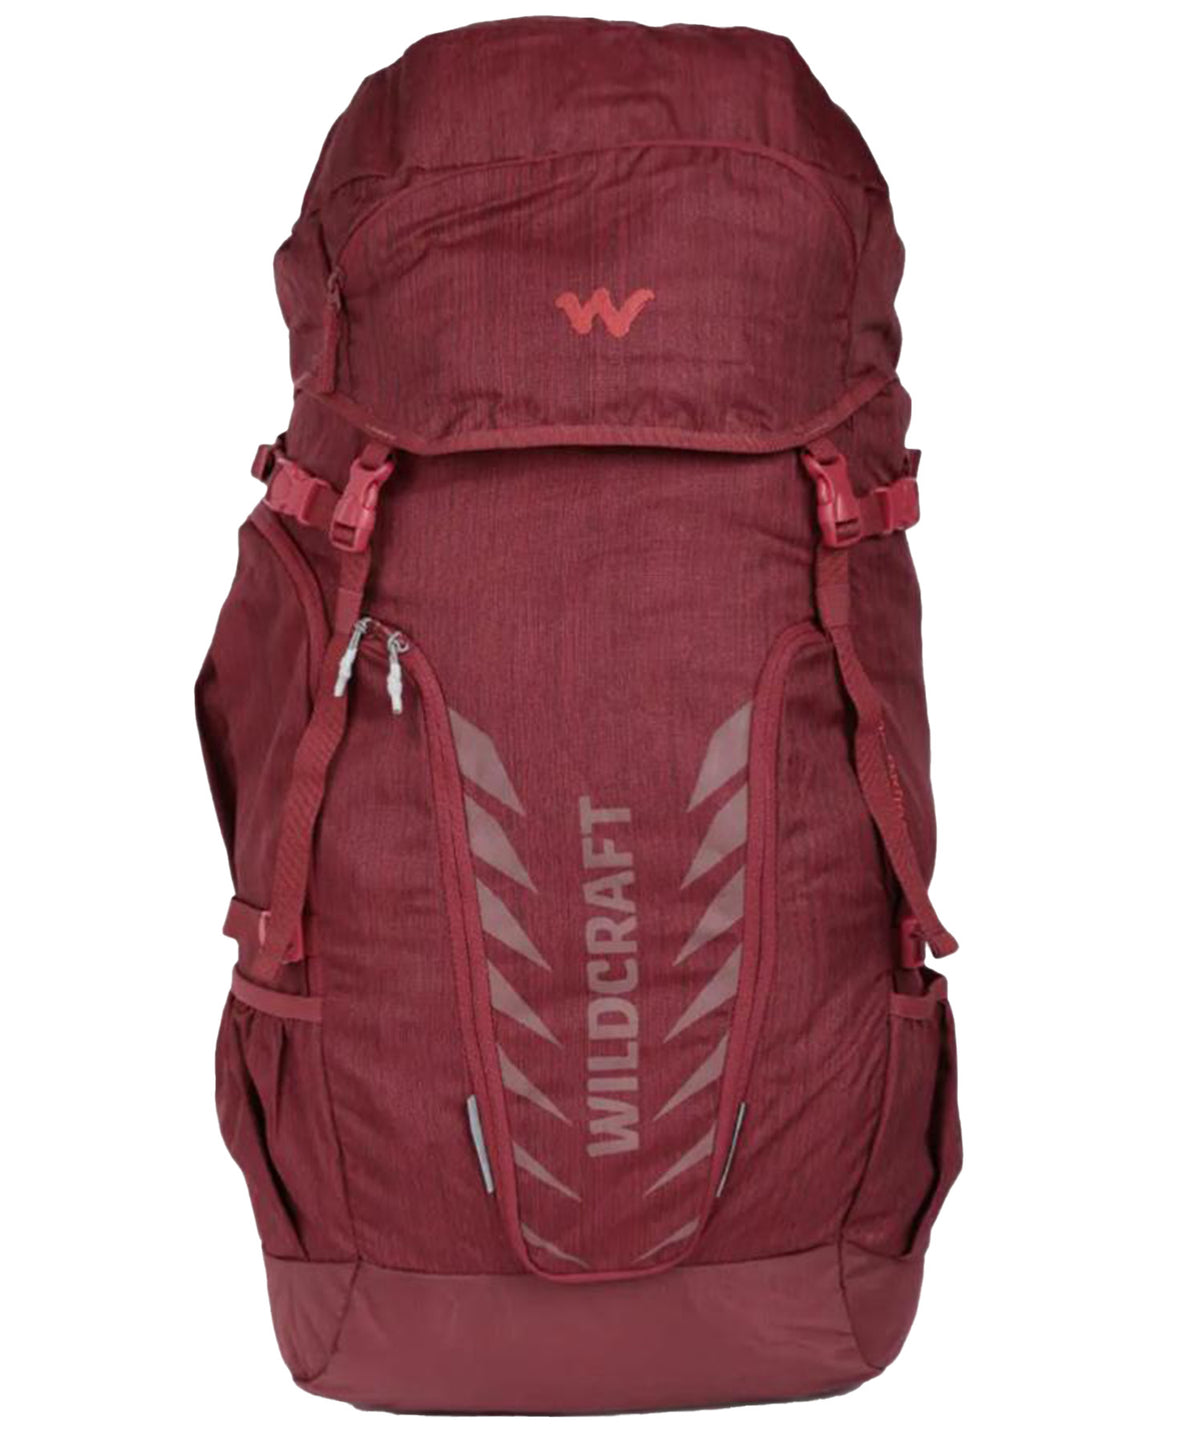 Wildcraft Travel Pro 50ltr Red Camping Backpack, TRAVEL PRO 50RD